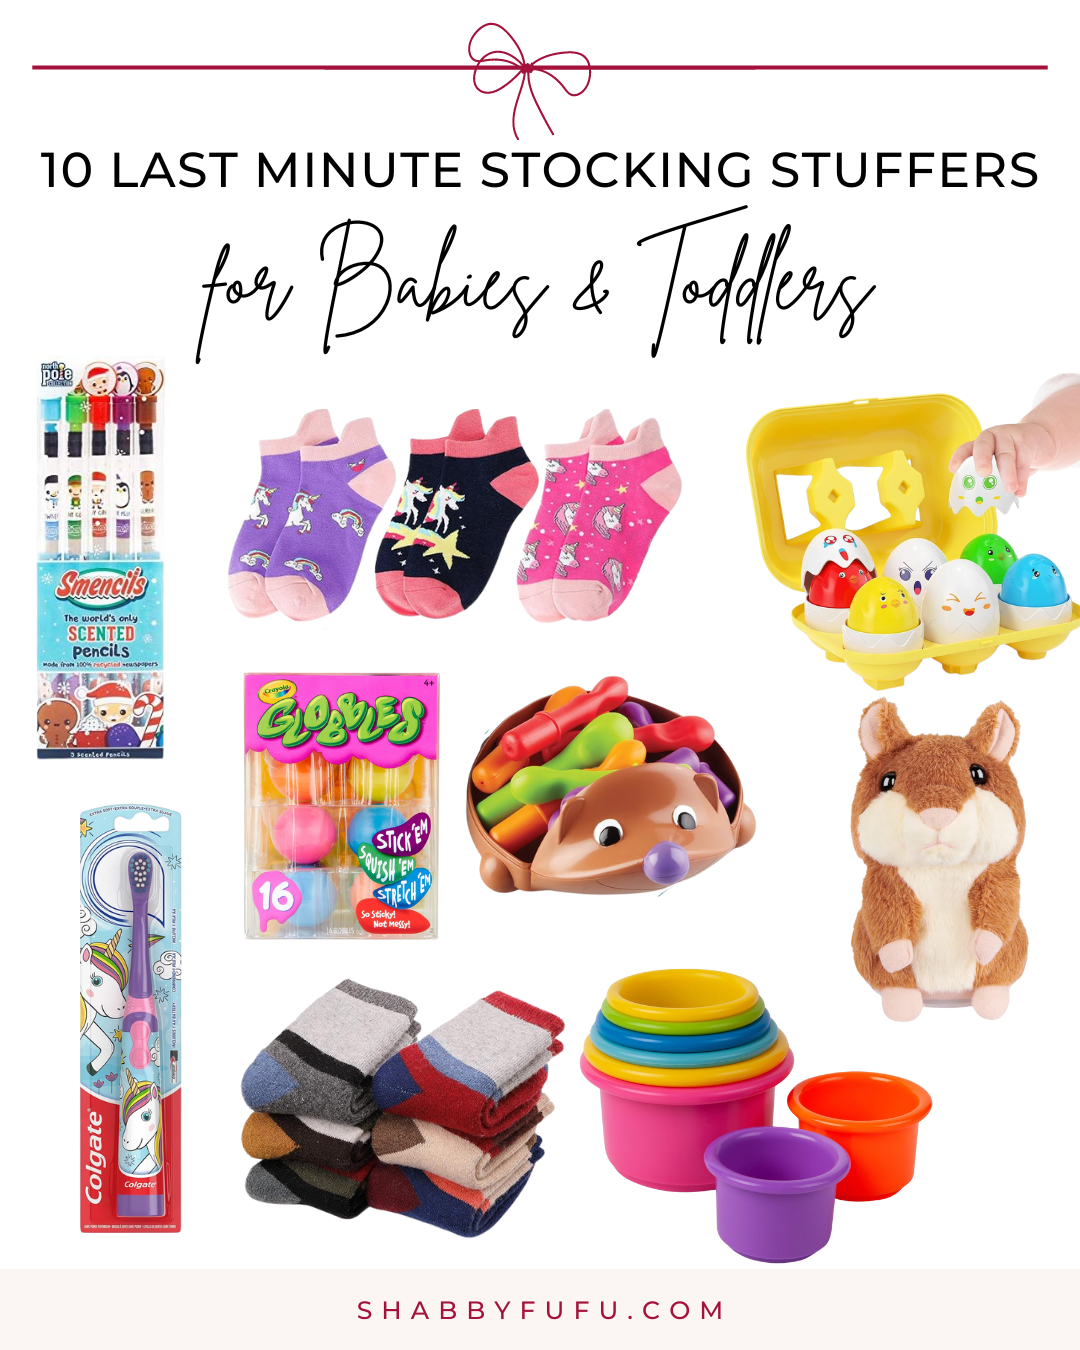 Pinterest decorative collage featuring items and products titled "10 Last Minute Stocking Stuffers For Babies and Toddlers"